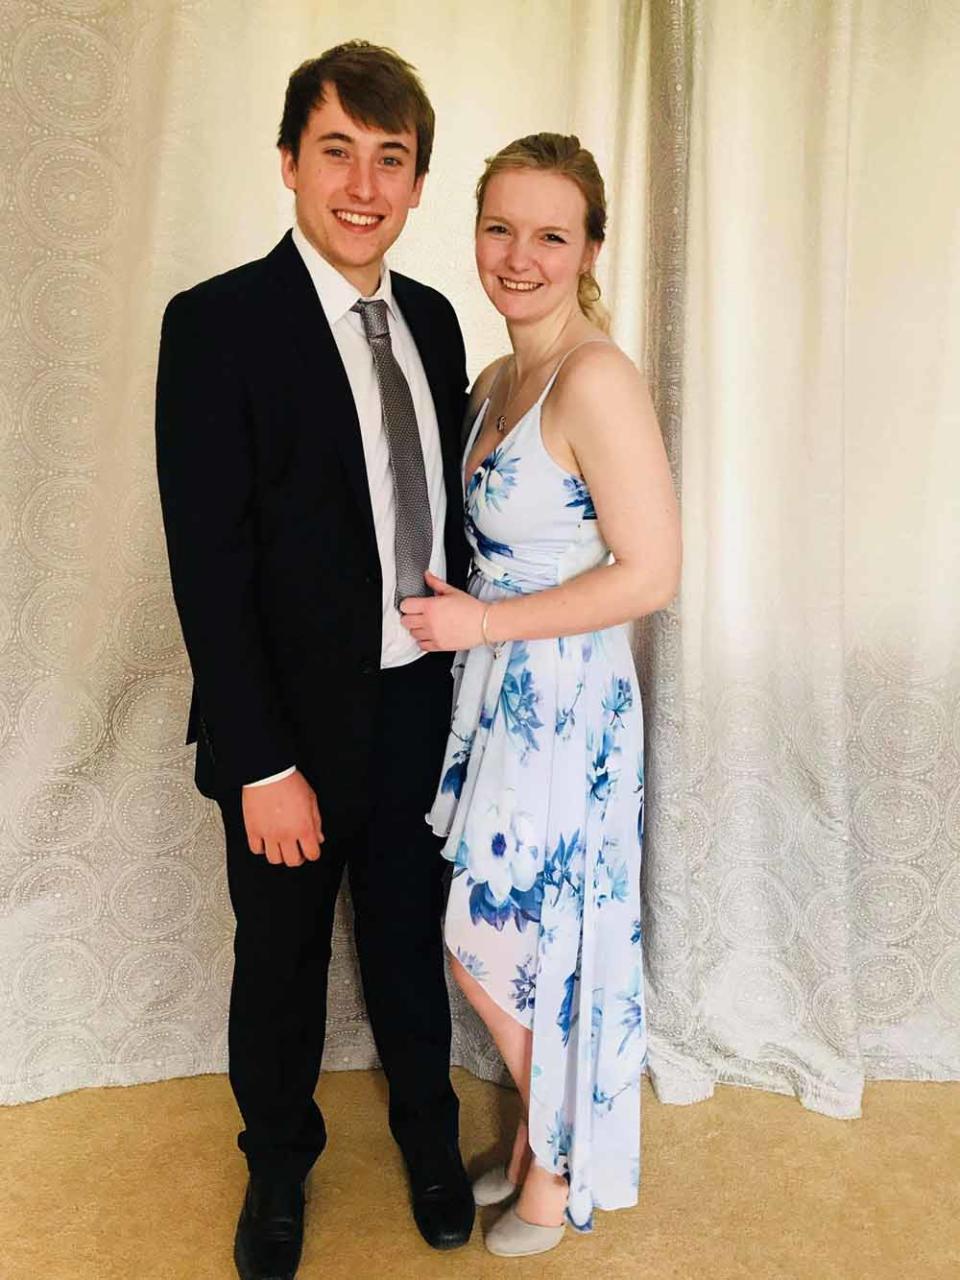 The 24-year-old electrical engineer, who lives with her boyfriend Dan in Somerset, suffers from idiopathic anaphylaxis. (SWNS)